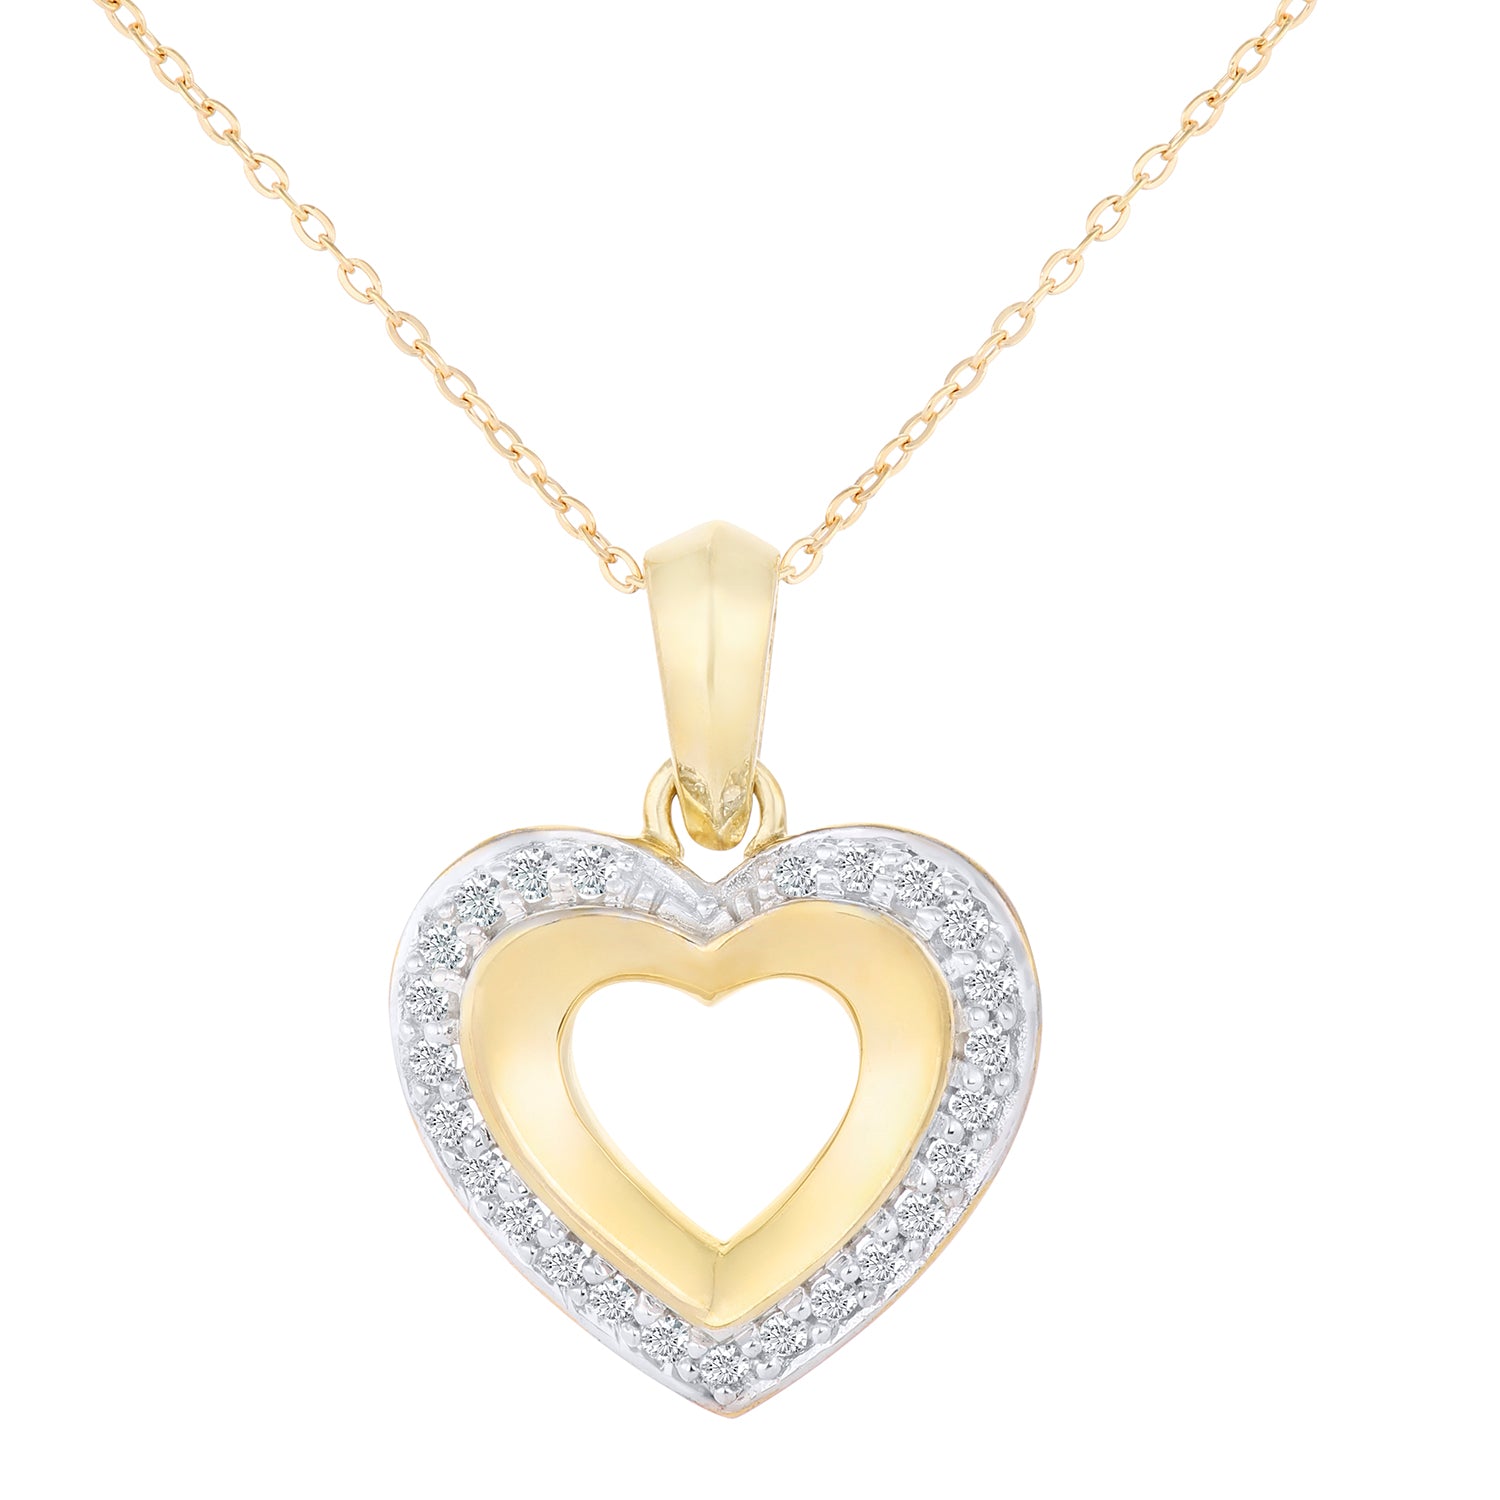 9ct Gold  Round 15pts Diamond Heart Pendant Necklace 18 inch - PP0AXL1810Y